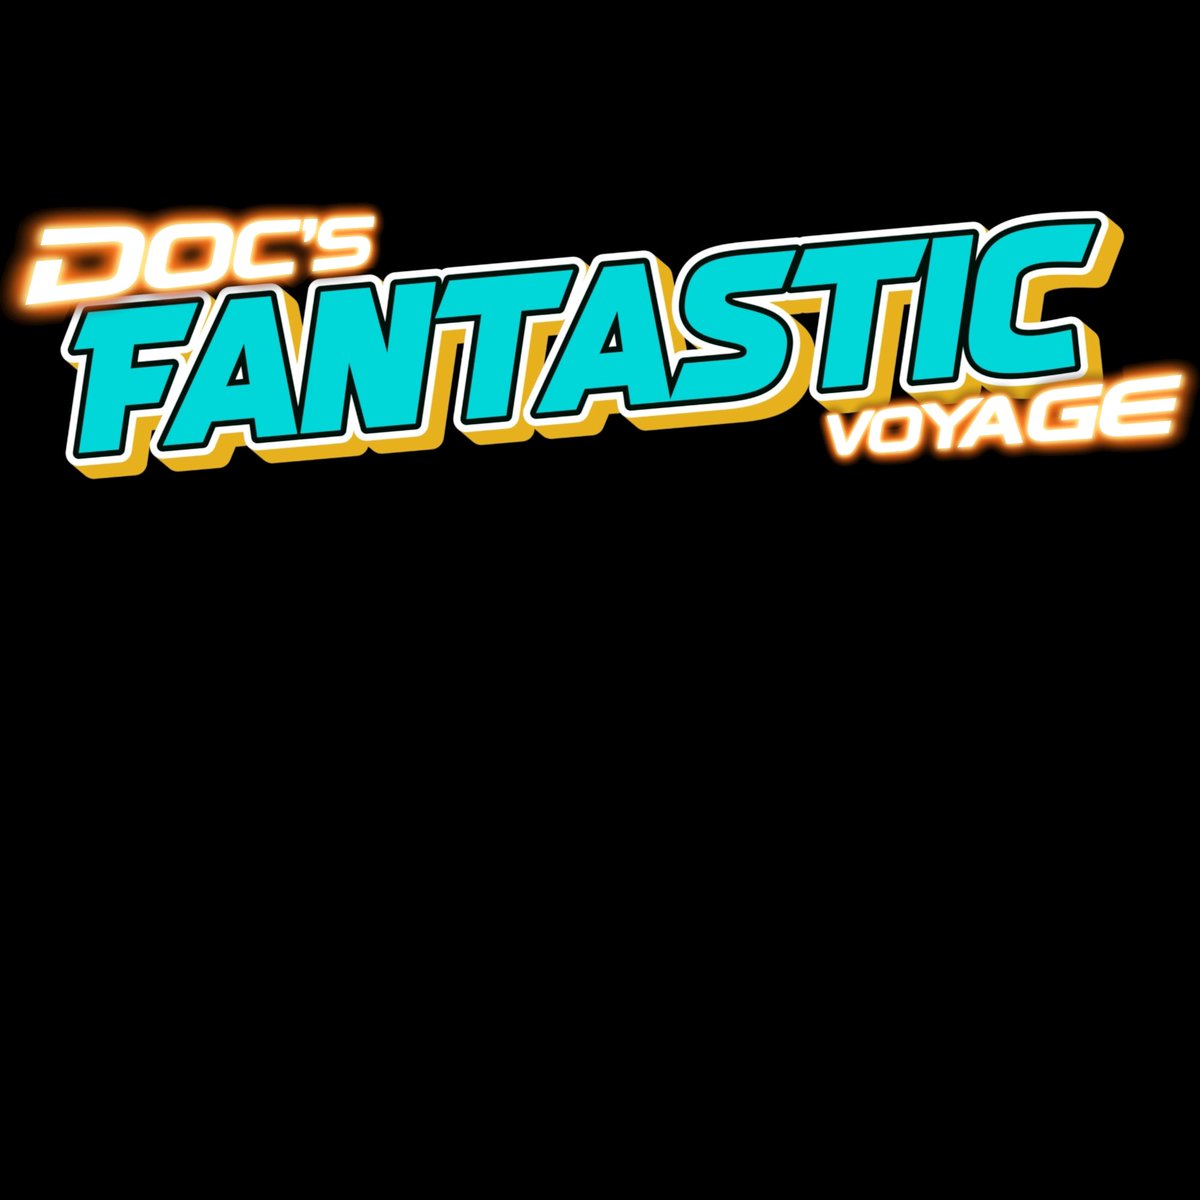 The response was good! 😱 @OfficialVoyage and I will be releasing a 9 track album appropriately titled 'DOC's Fantastic VOYAGE' 💪 New singles coming soon 😘